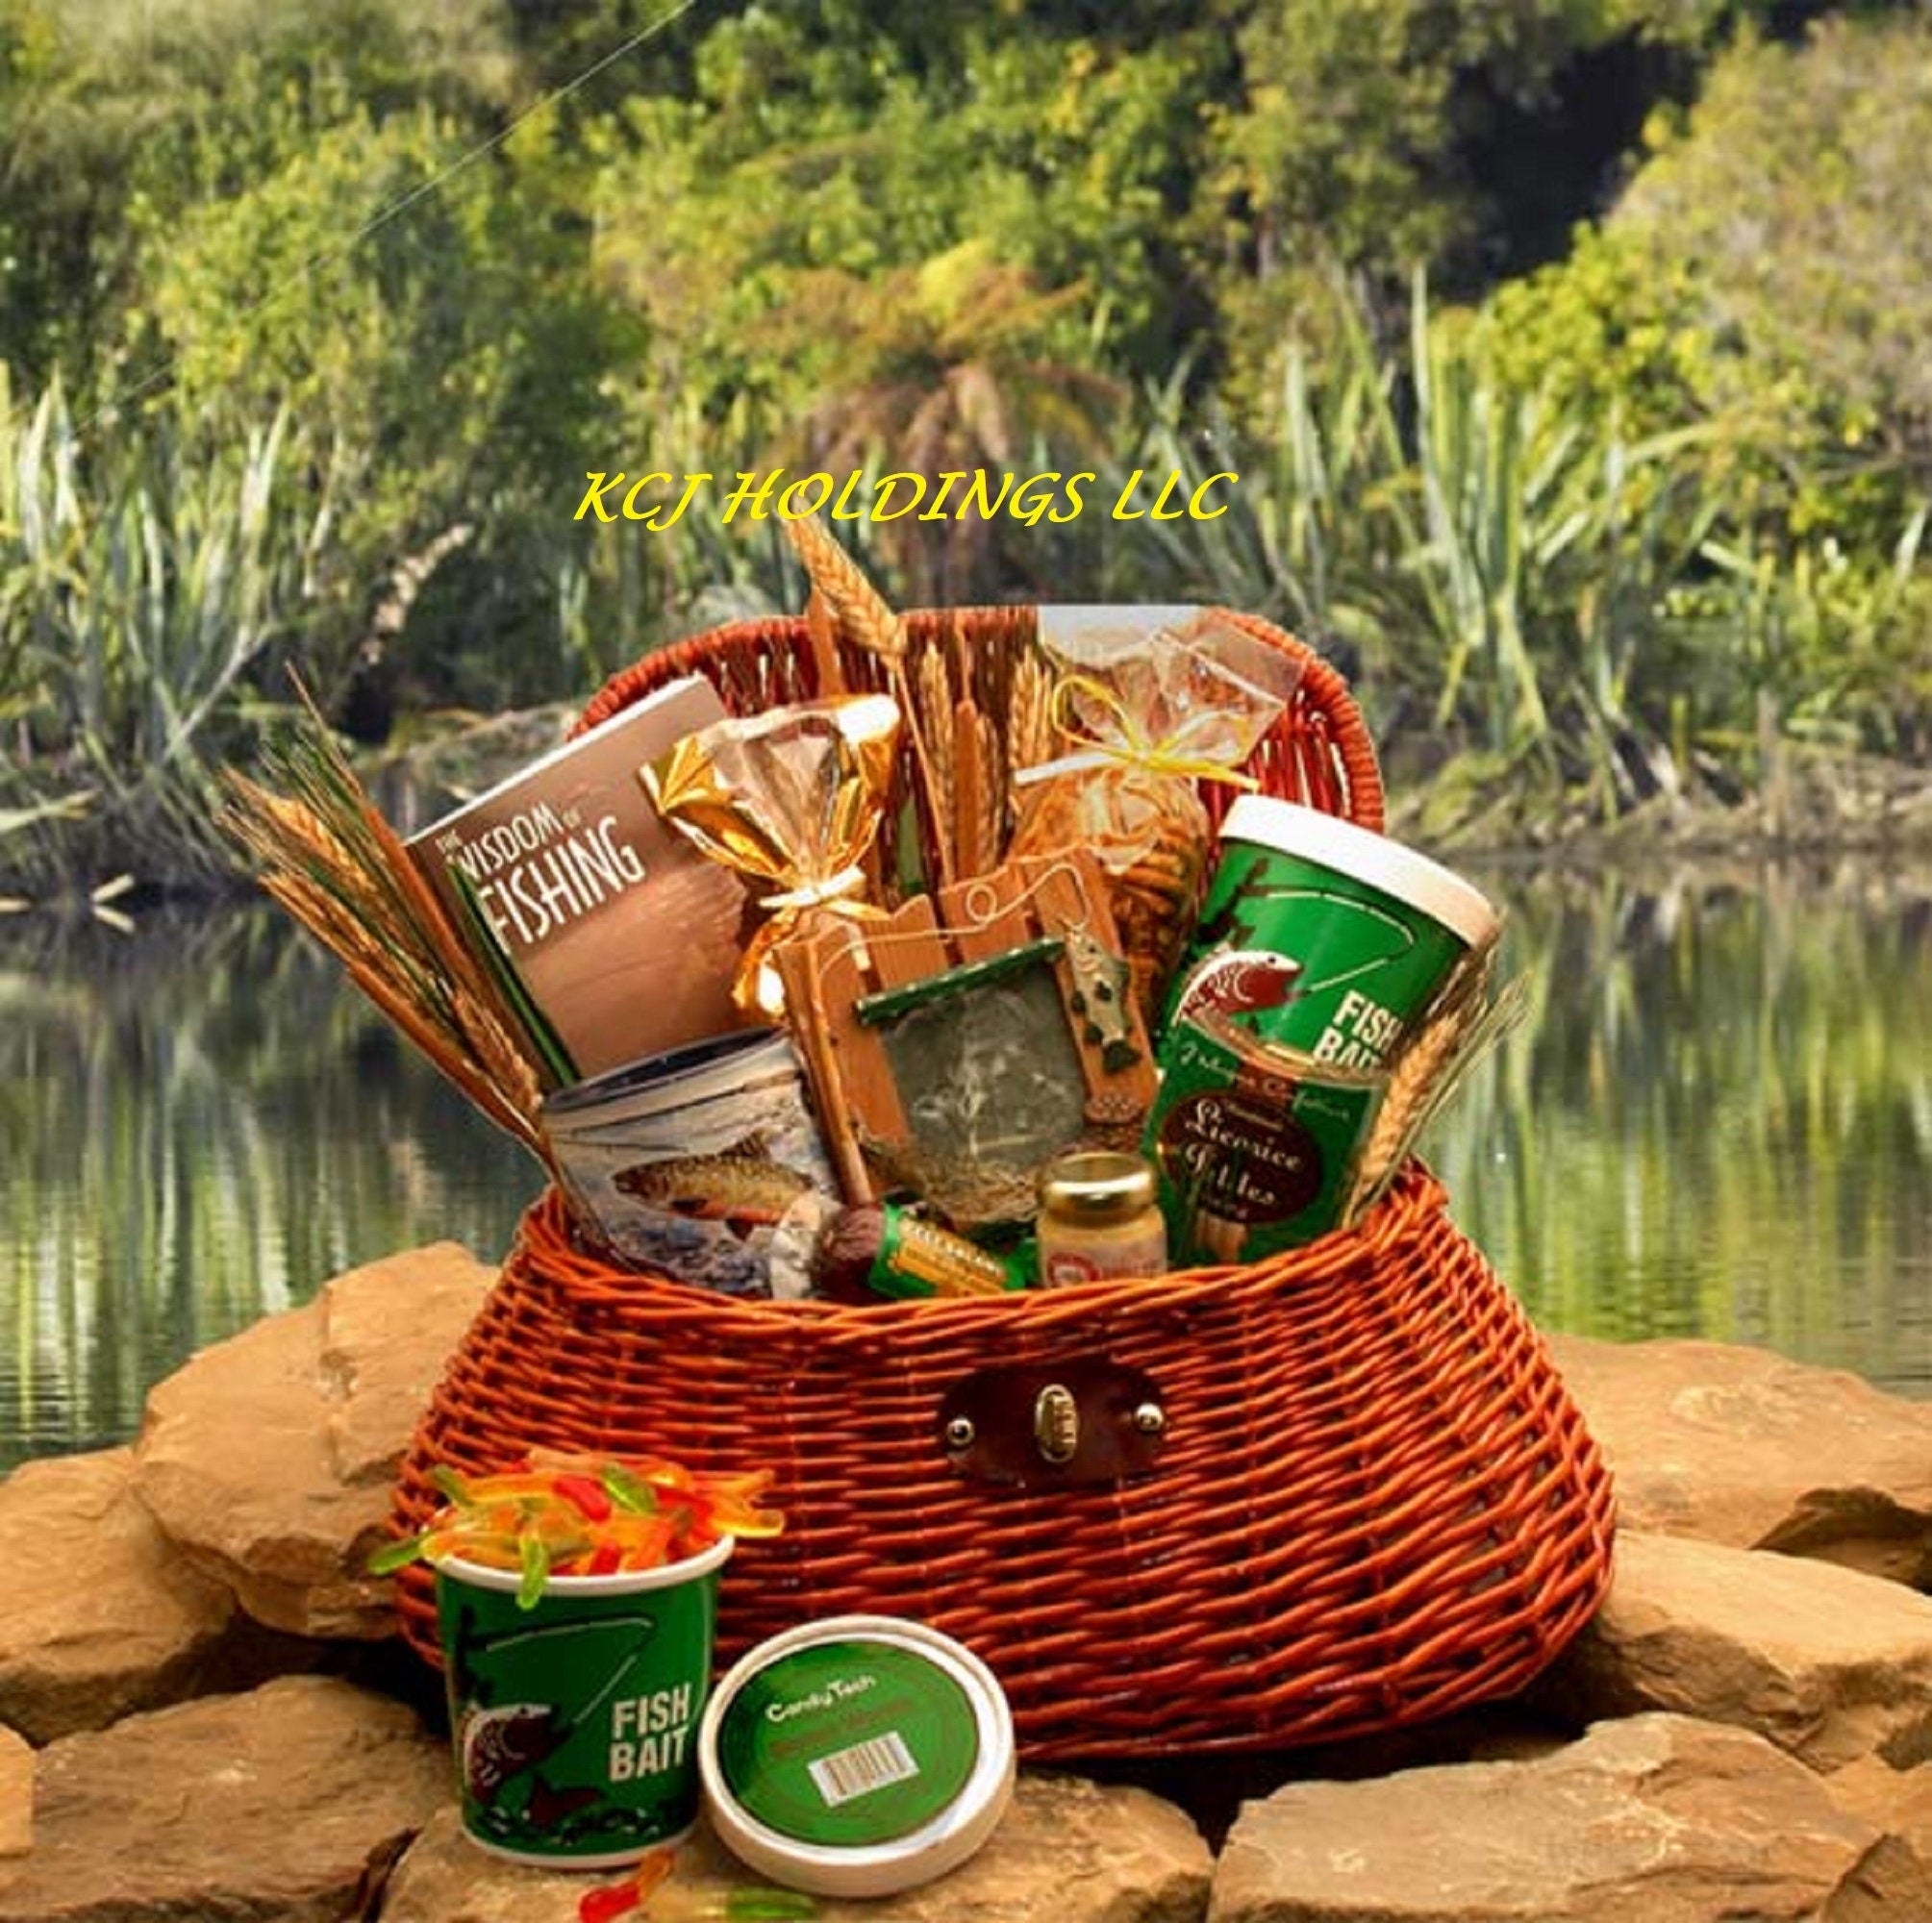 Fishing Creel Gift Basket Jam-Packed with Useful Fishing Equipment, Sweet Treats and Novelty Items | Father's Day | Gifts for Him